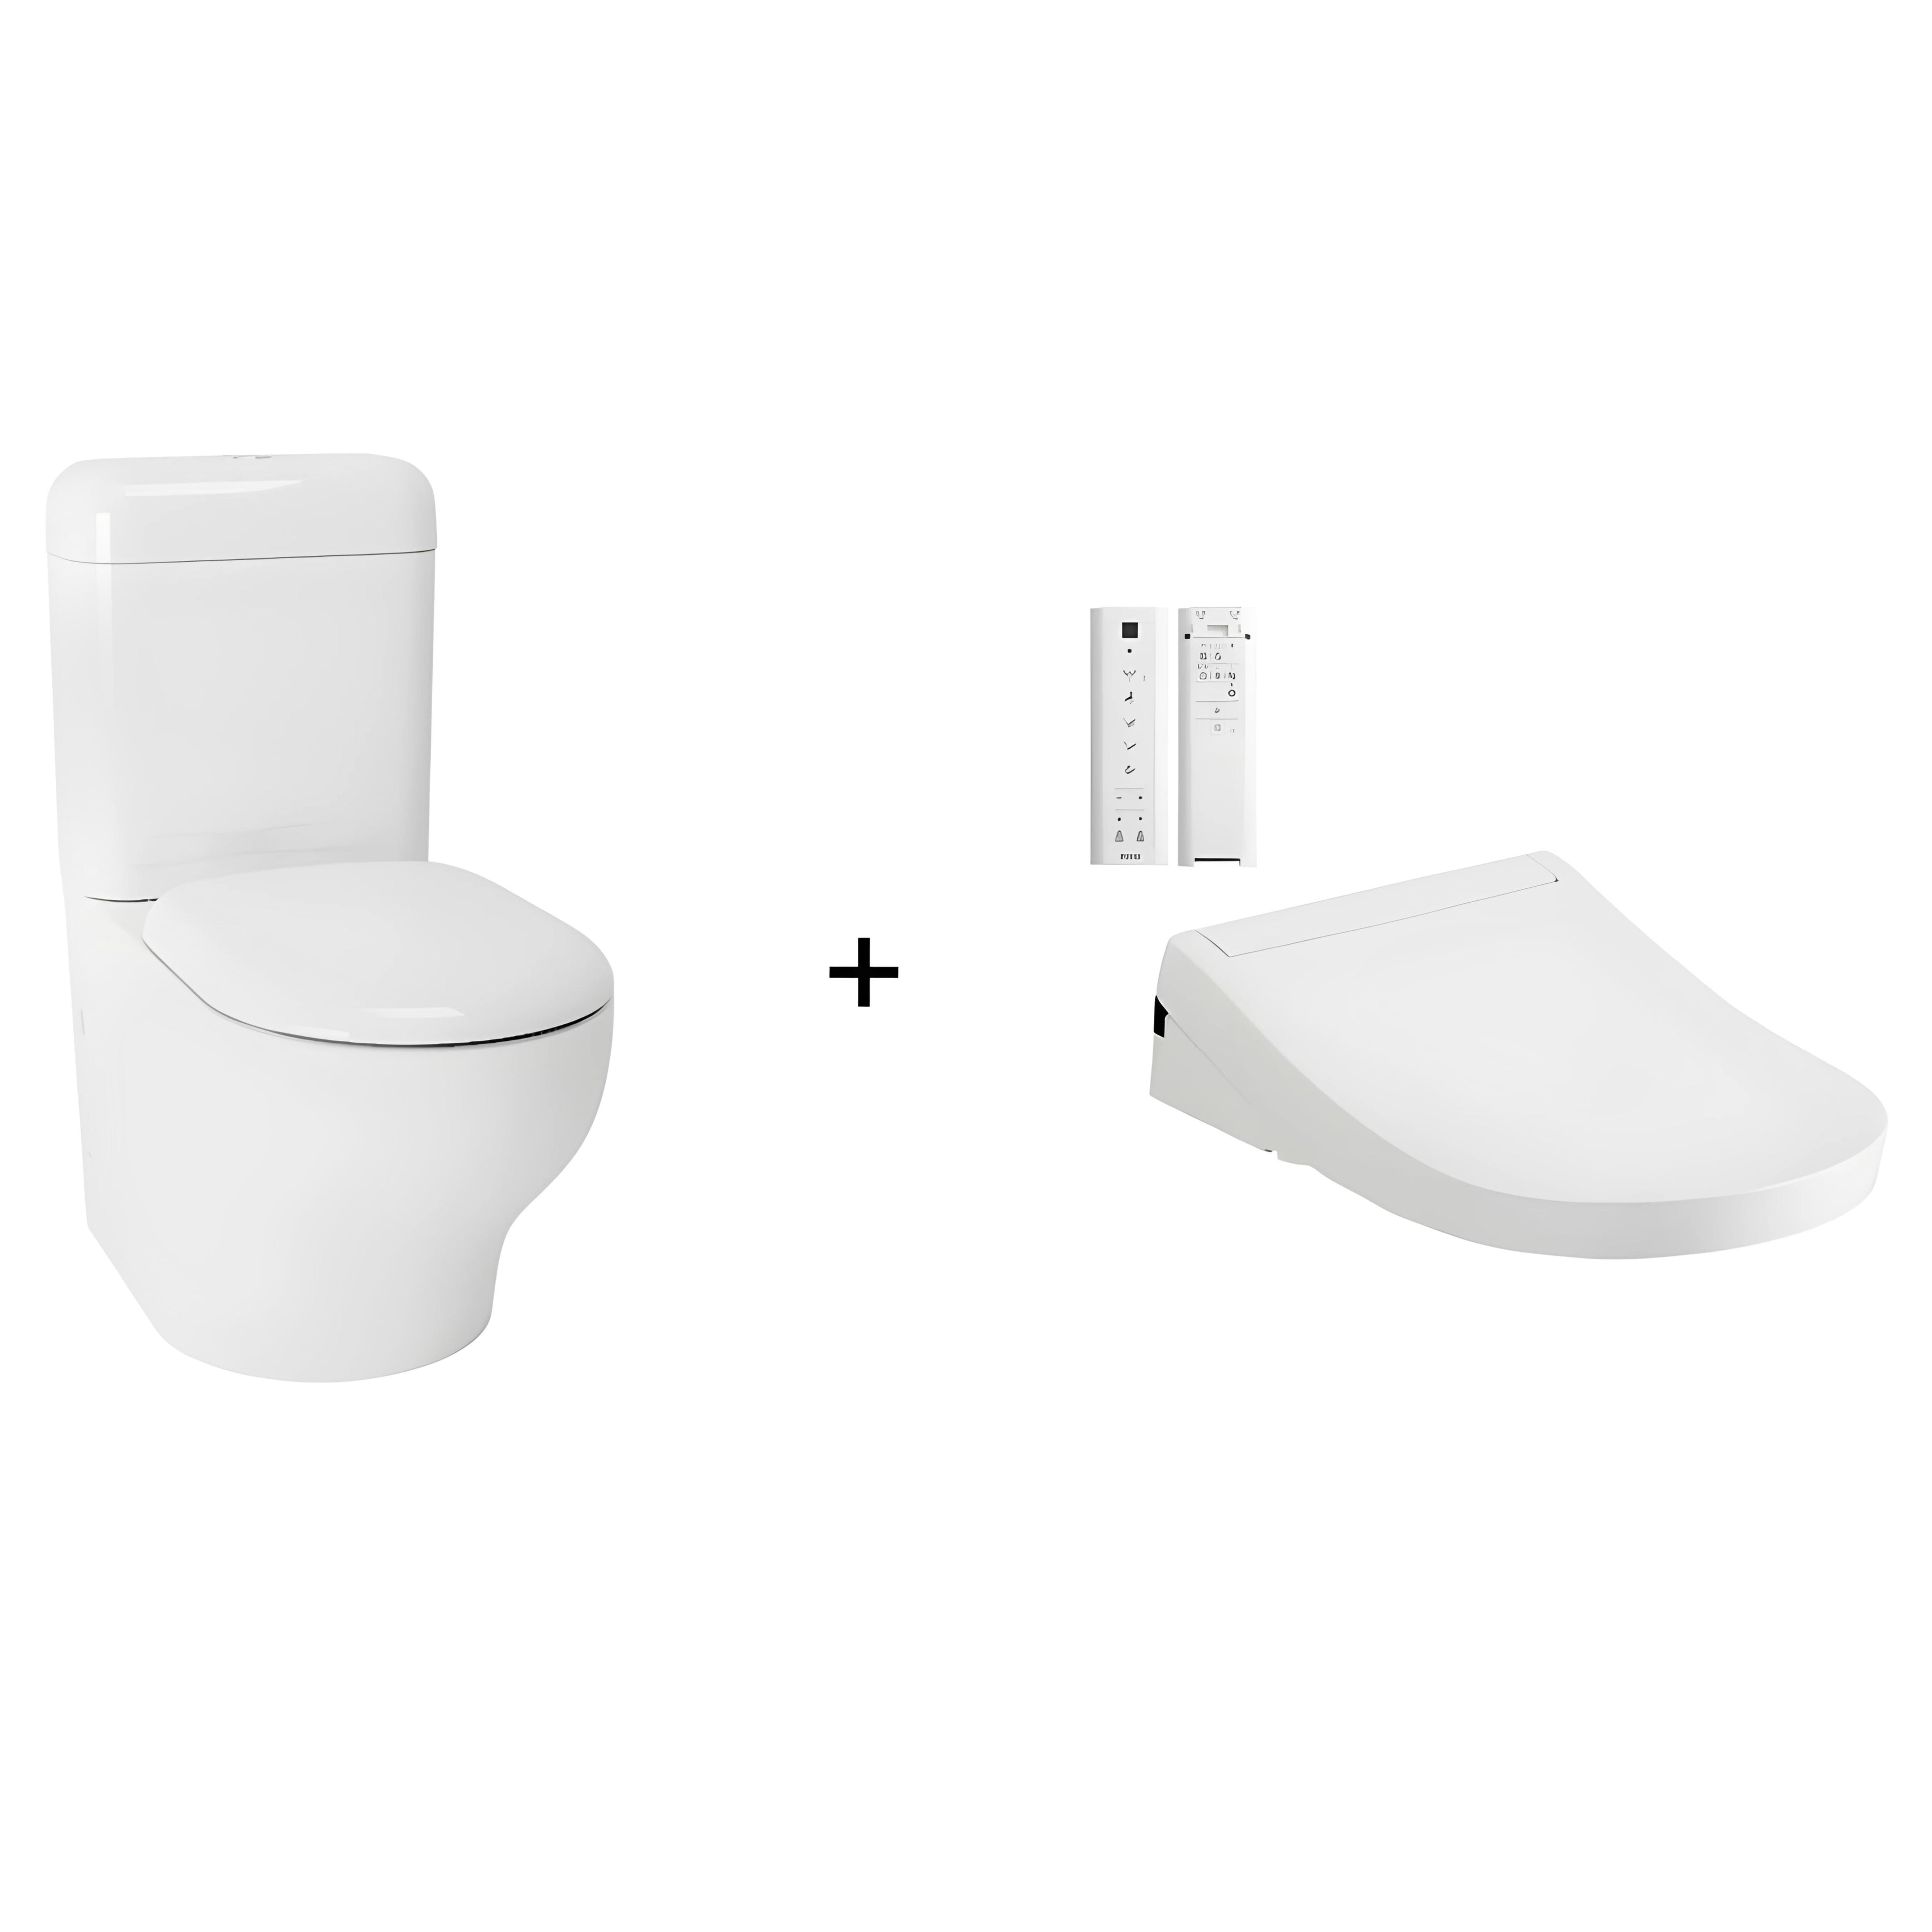 TOTO HAYON CLOSE COUPLED TOILET AND S5 WASHLET W/ REMOTE CONTROL PACKAGE (D-SHAPED) GLOSS WHITE